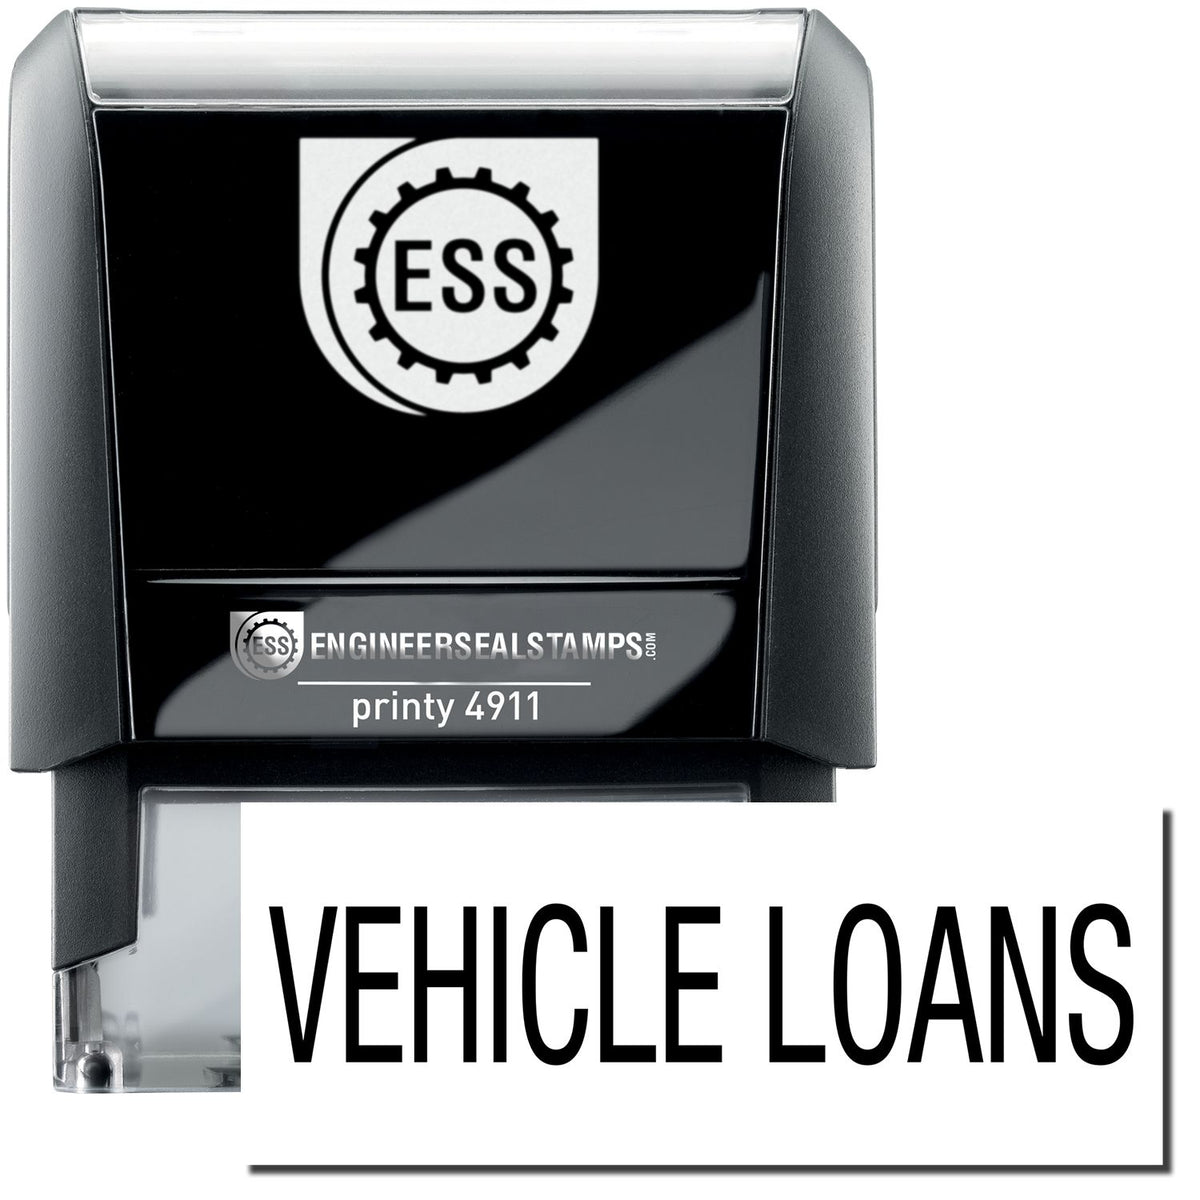 A self-inking stamp with a stamped image showing how the text &quot;VEHICLE LOANS&quot; is displayed after stamping.